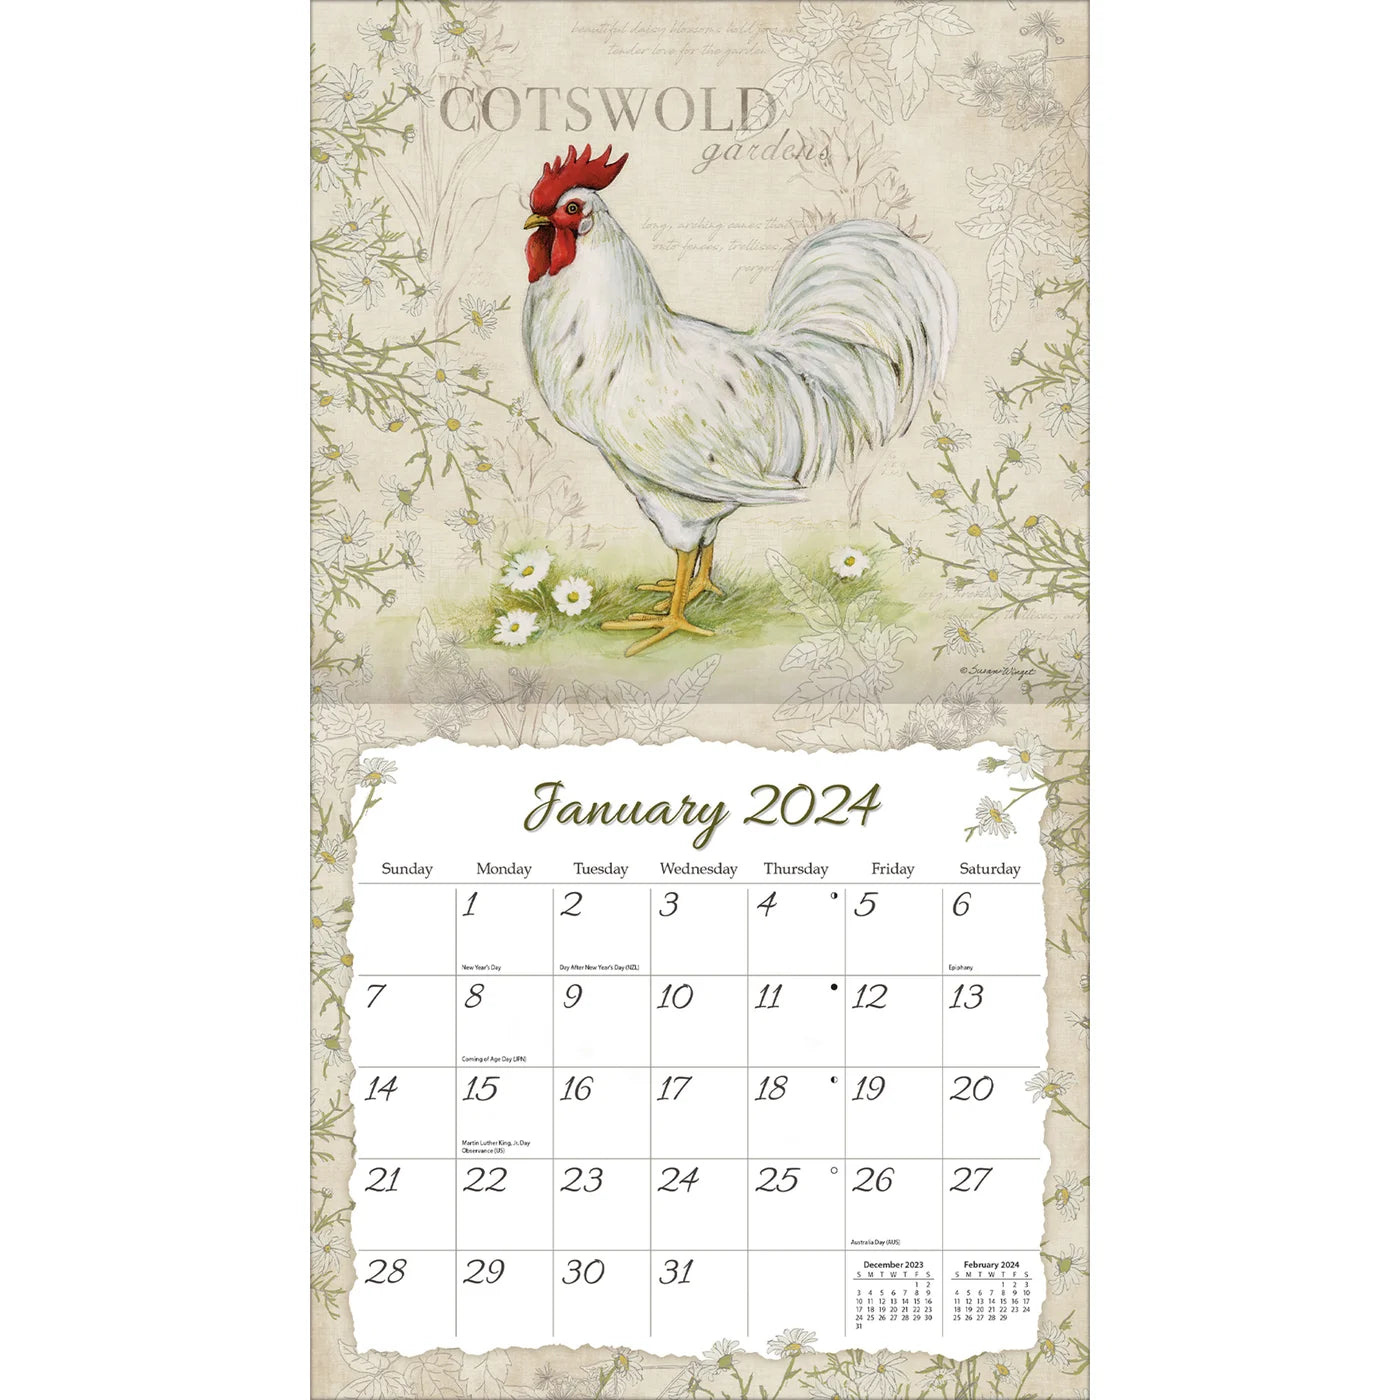 2024 LANG Proud Rooster By Susan Winget - Deluxe Wall Calendar